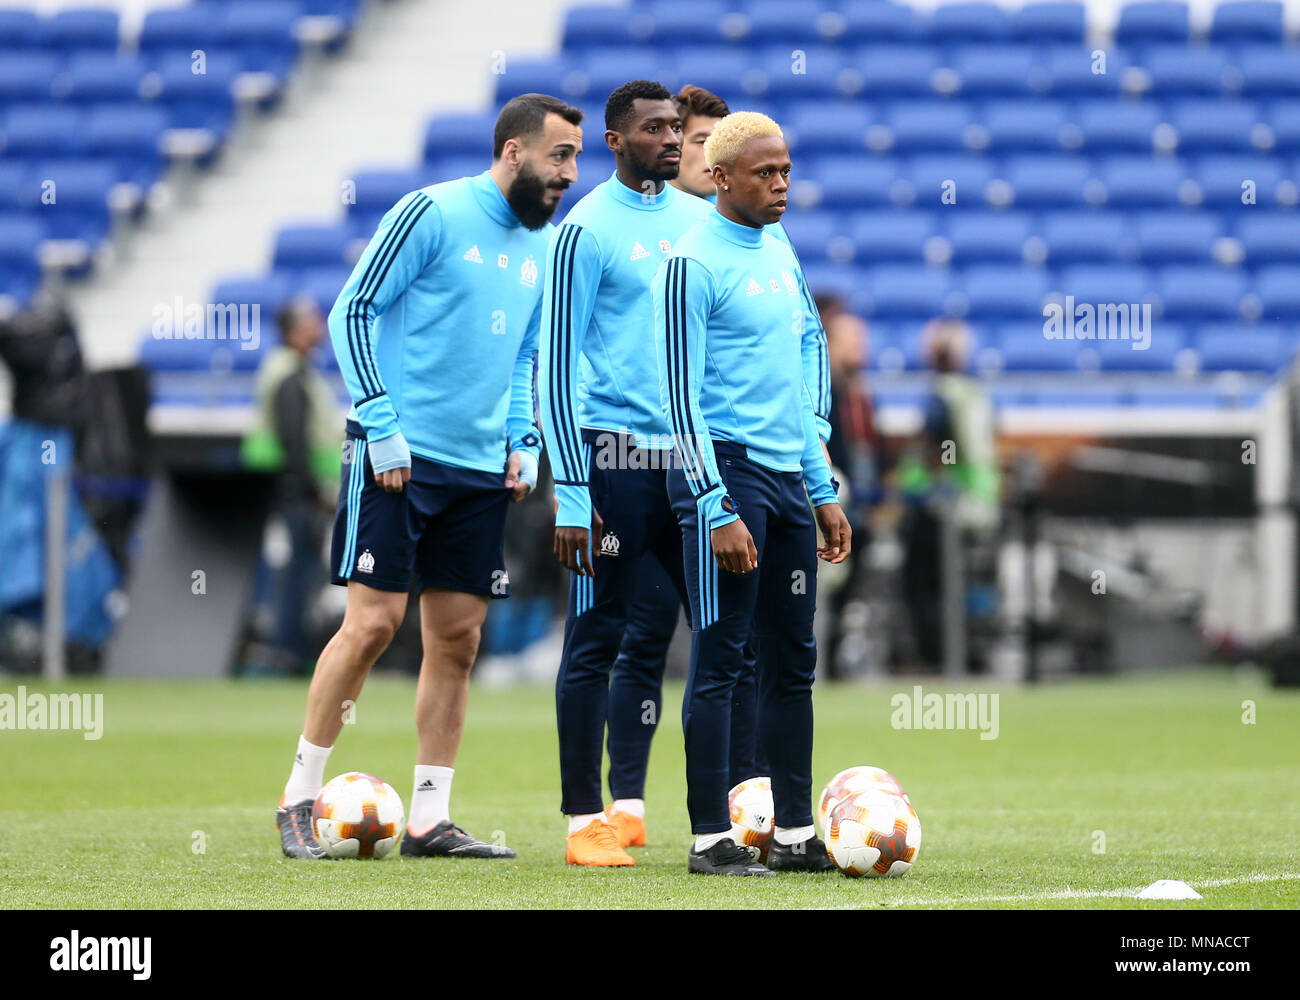 Clinton N'Jie of Marseille with Andre-Frank Zambo Anguissa of Marseille and Kostas Mitroglou of Marseille during a Marseille training session, prior to the Europa League final, at Parc Olympique Lyonnais on May 15th 2018 in Lyon, France. (Photo by Leila Coker/phcimages.com) Stock Photo